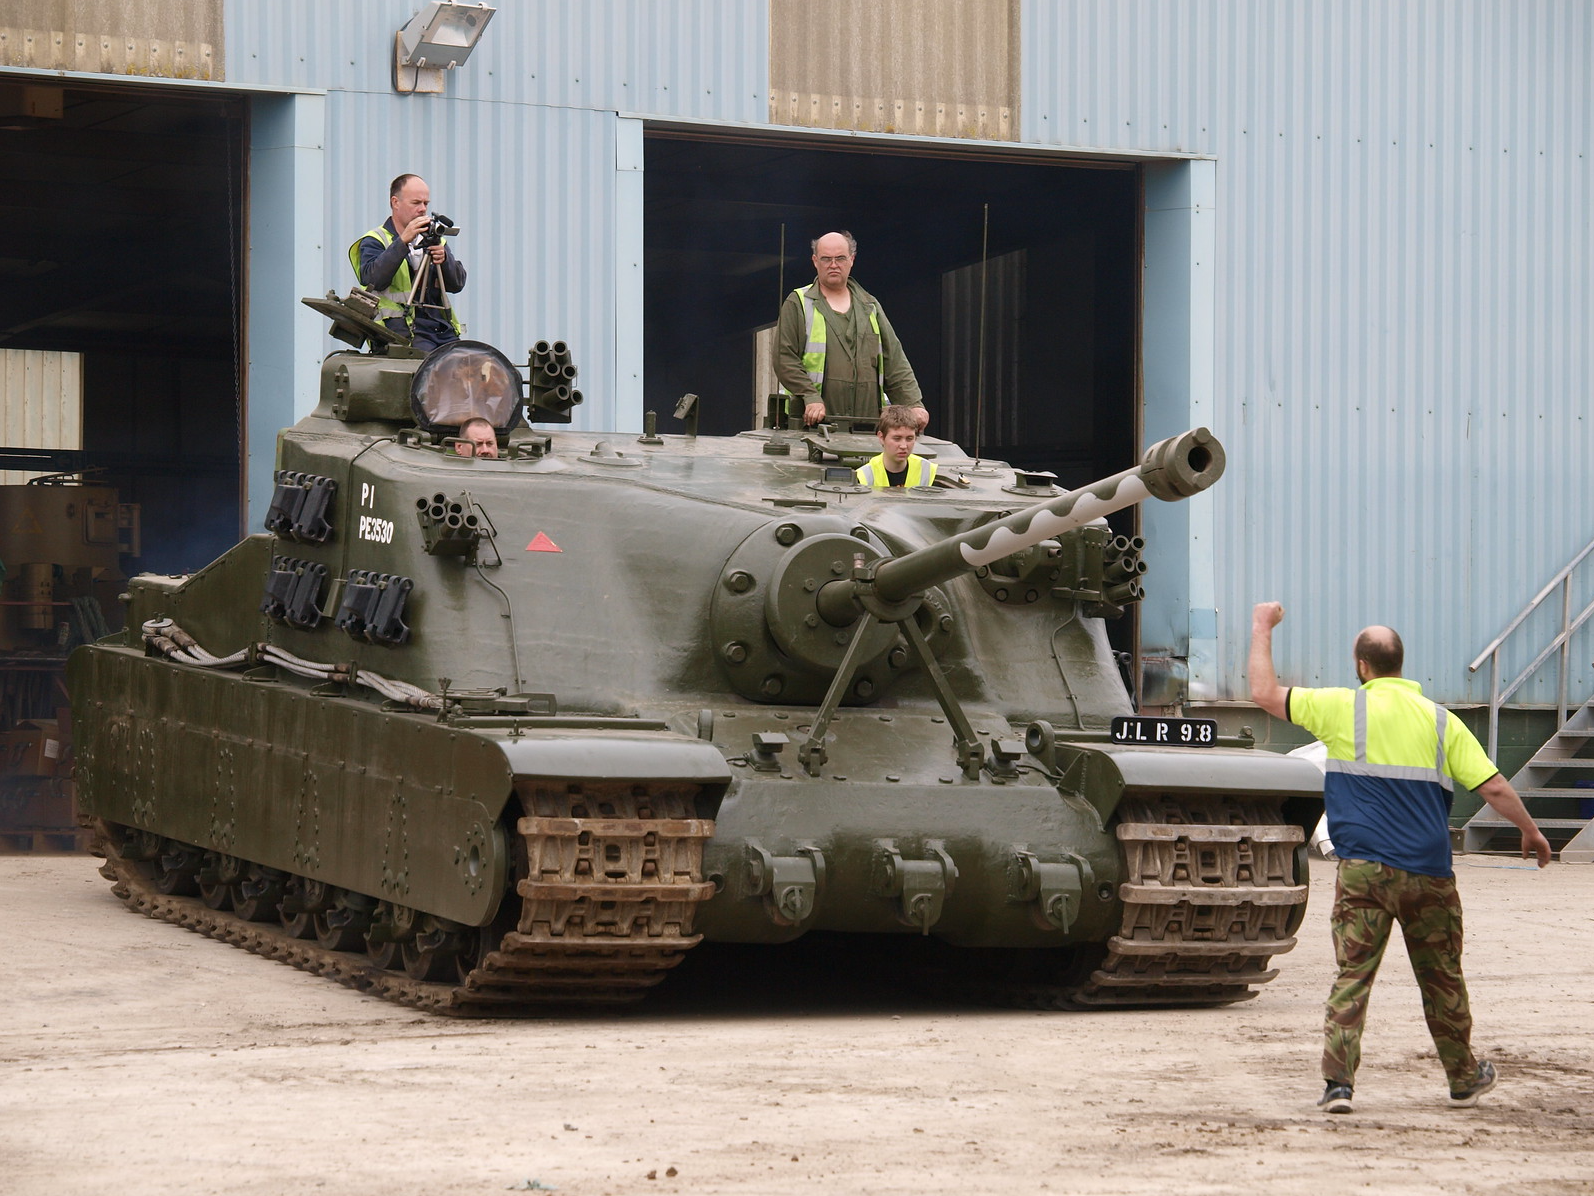 A39 Tortoise driving at Tankfest 2011.